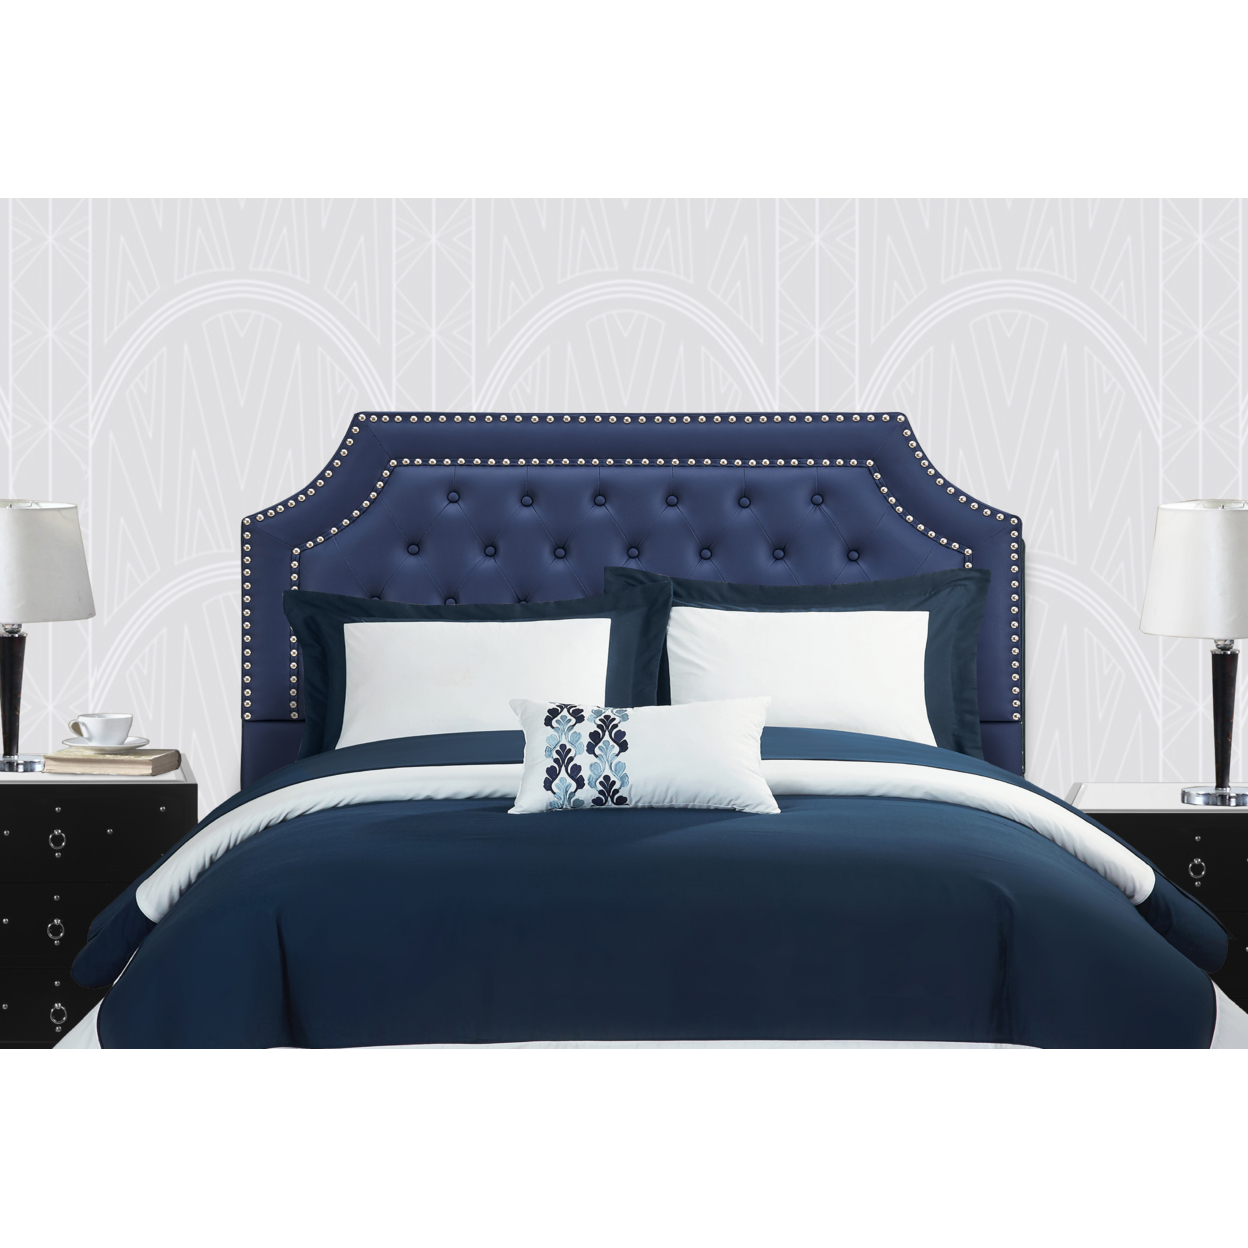 Chic Home Mahlon Headboard PU Leather Upholstered Button Tufted Double Row Silver Nailhead Trim - Navy, King